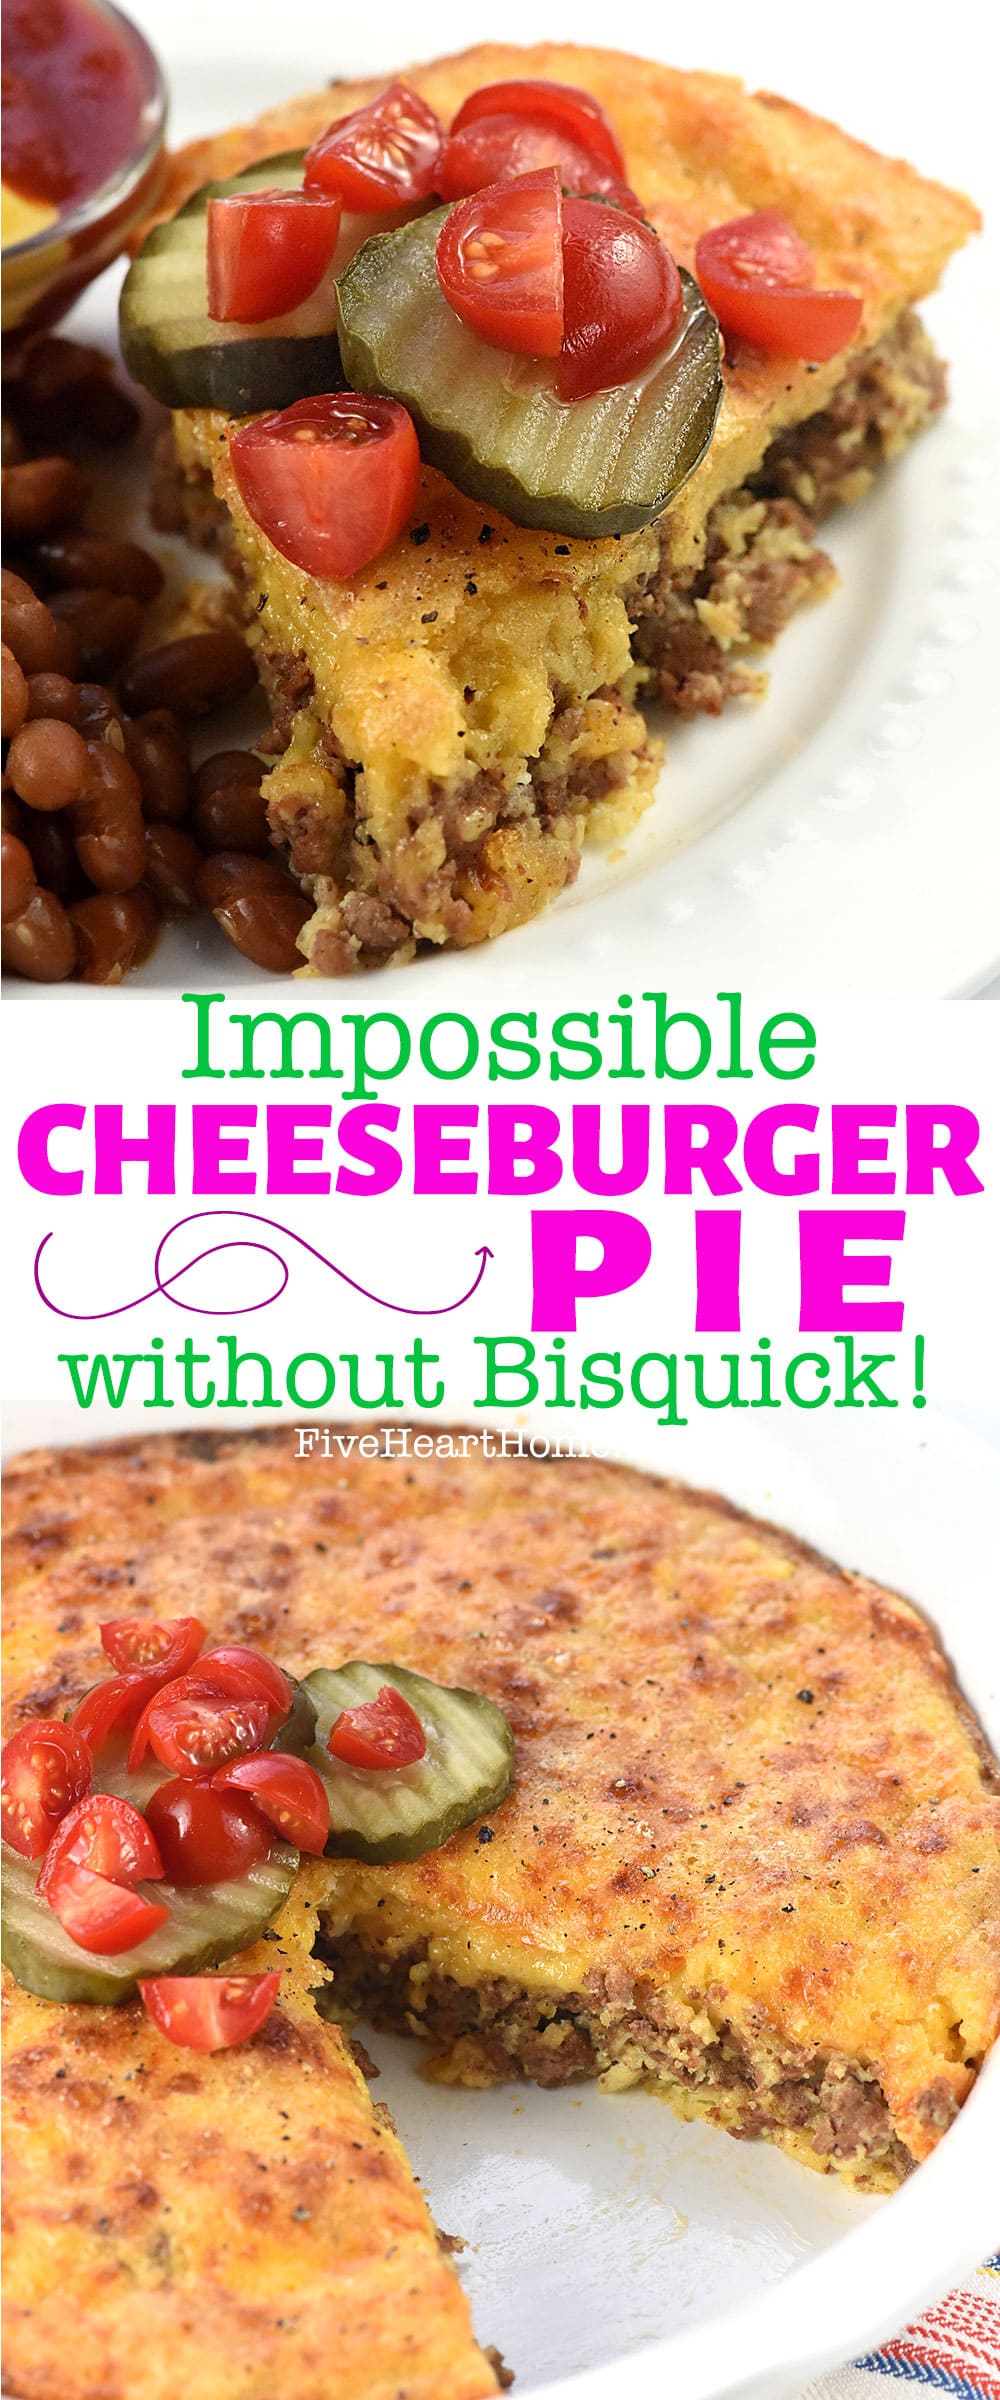 Impossible Cheeseburger Pie without Bisquick ~ a wholesome, from-scratch twist on the classic recipe featuring seasoned ground beef, grated cheddar cheese, and a homemade topping made with whole wheat flour! | FiveHeartHome.com via @fivehearthome